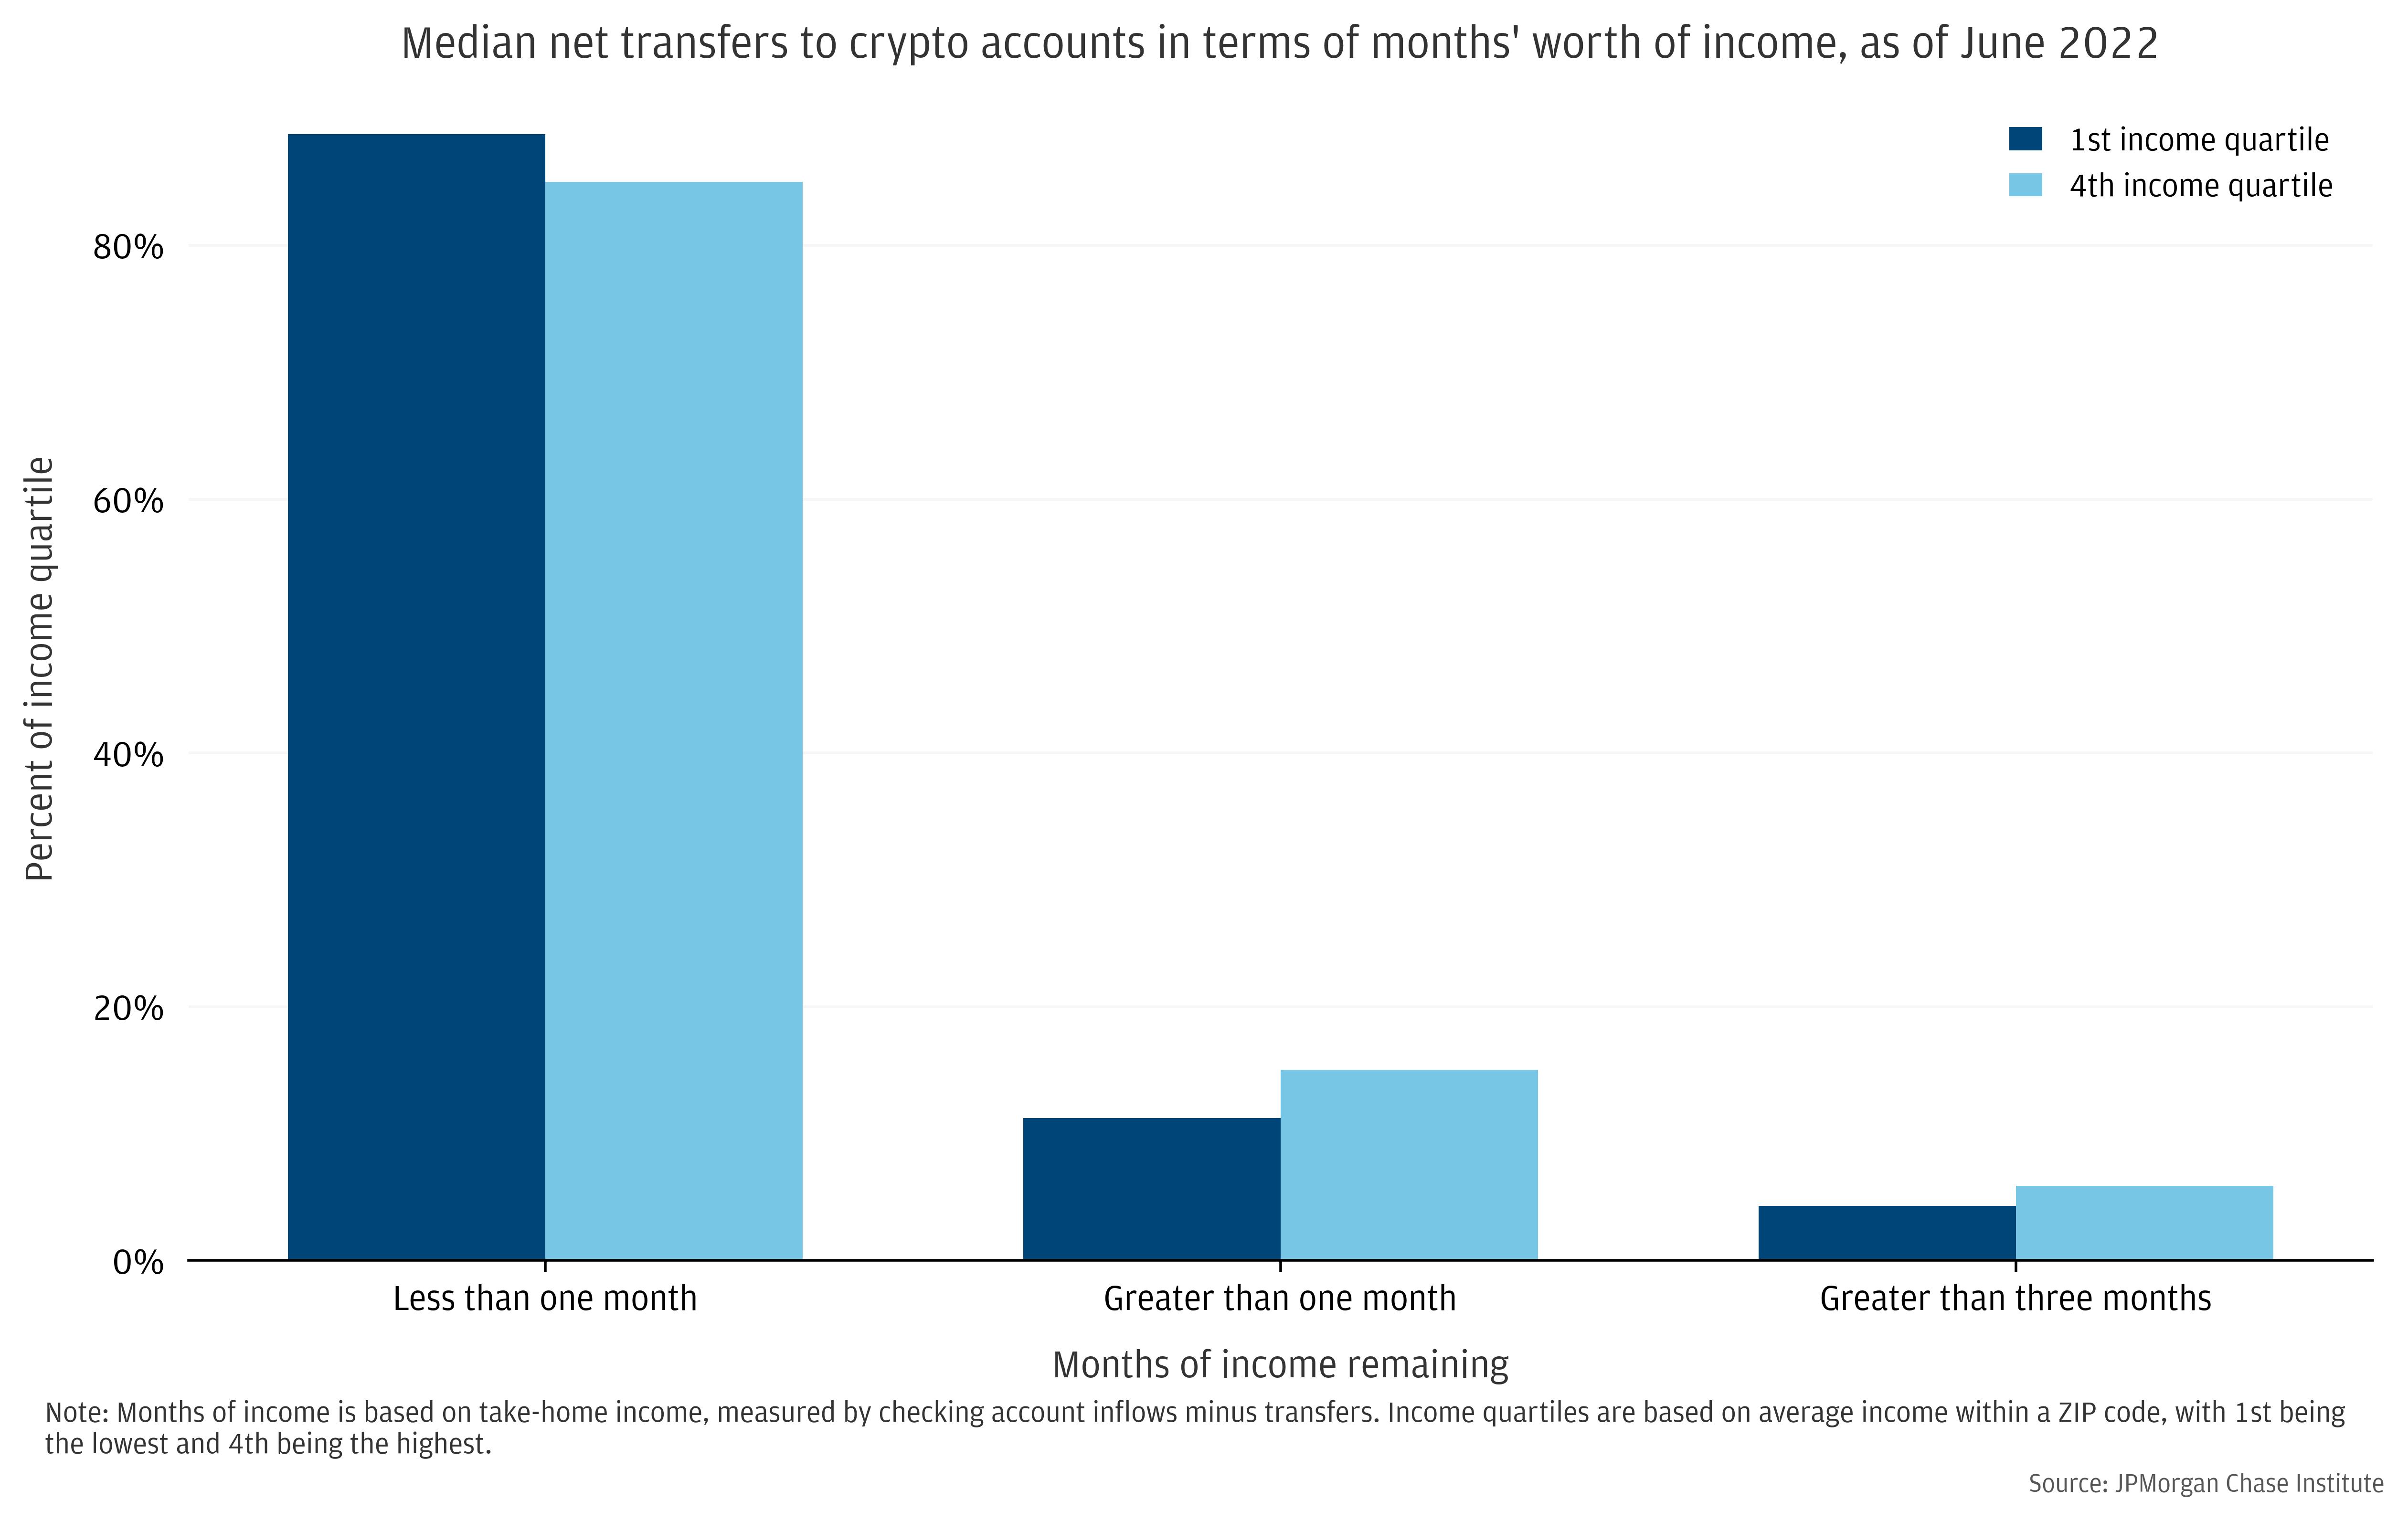 About 15 percent of individuals have transferred over 1 month’s worth of income into crypto accounts, with a somewhat higher share for high-income individuals.